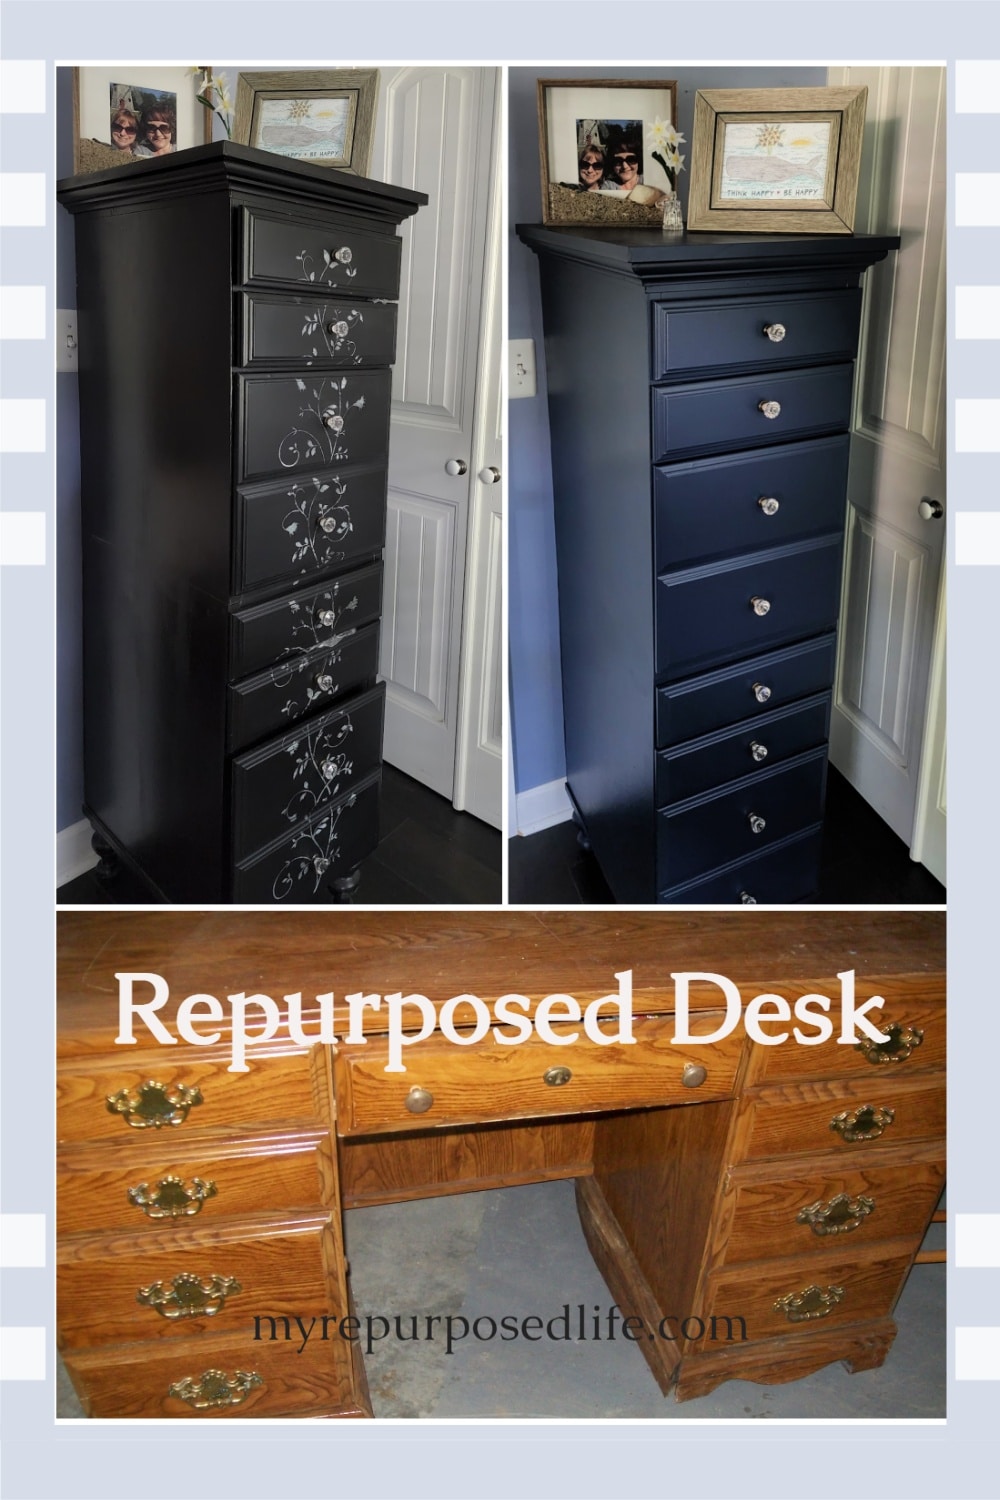 Using a repurposed desk to make a tall chest, keeps all the storage area. However it creates a smaller footprint in your space. Step by step directions. #MyRepurposedLife #repurposed #furniture #desk #chest #organization #doityourself via @repurposedlife